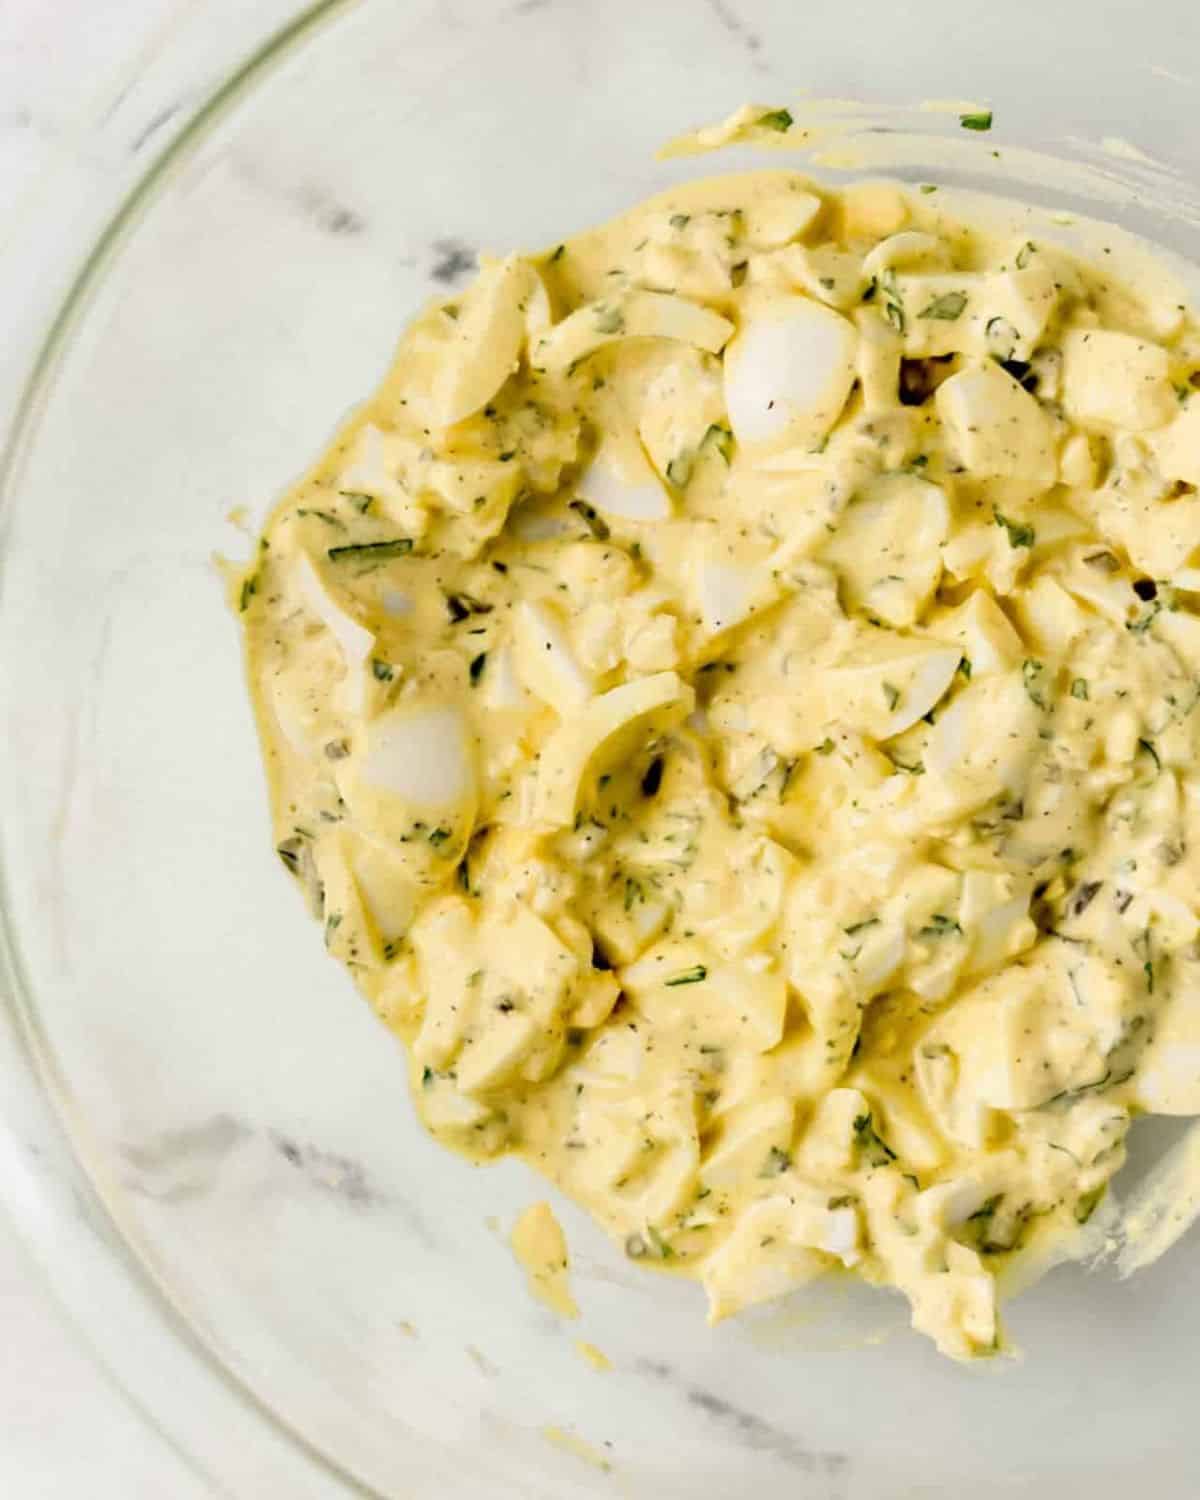 Egg salad ingredients combined in large glass mixing bowl on marble surface. 